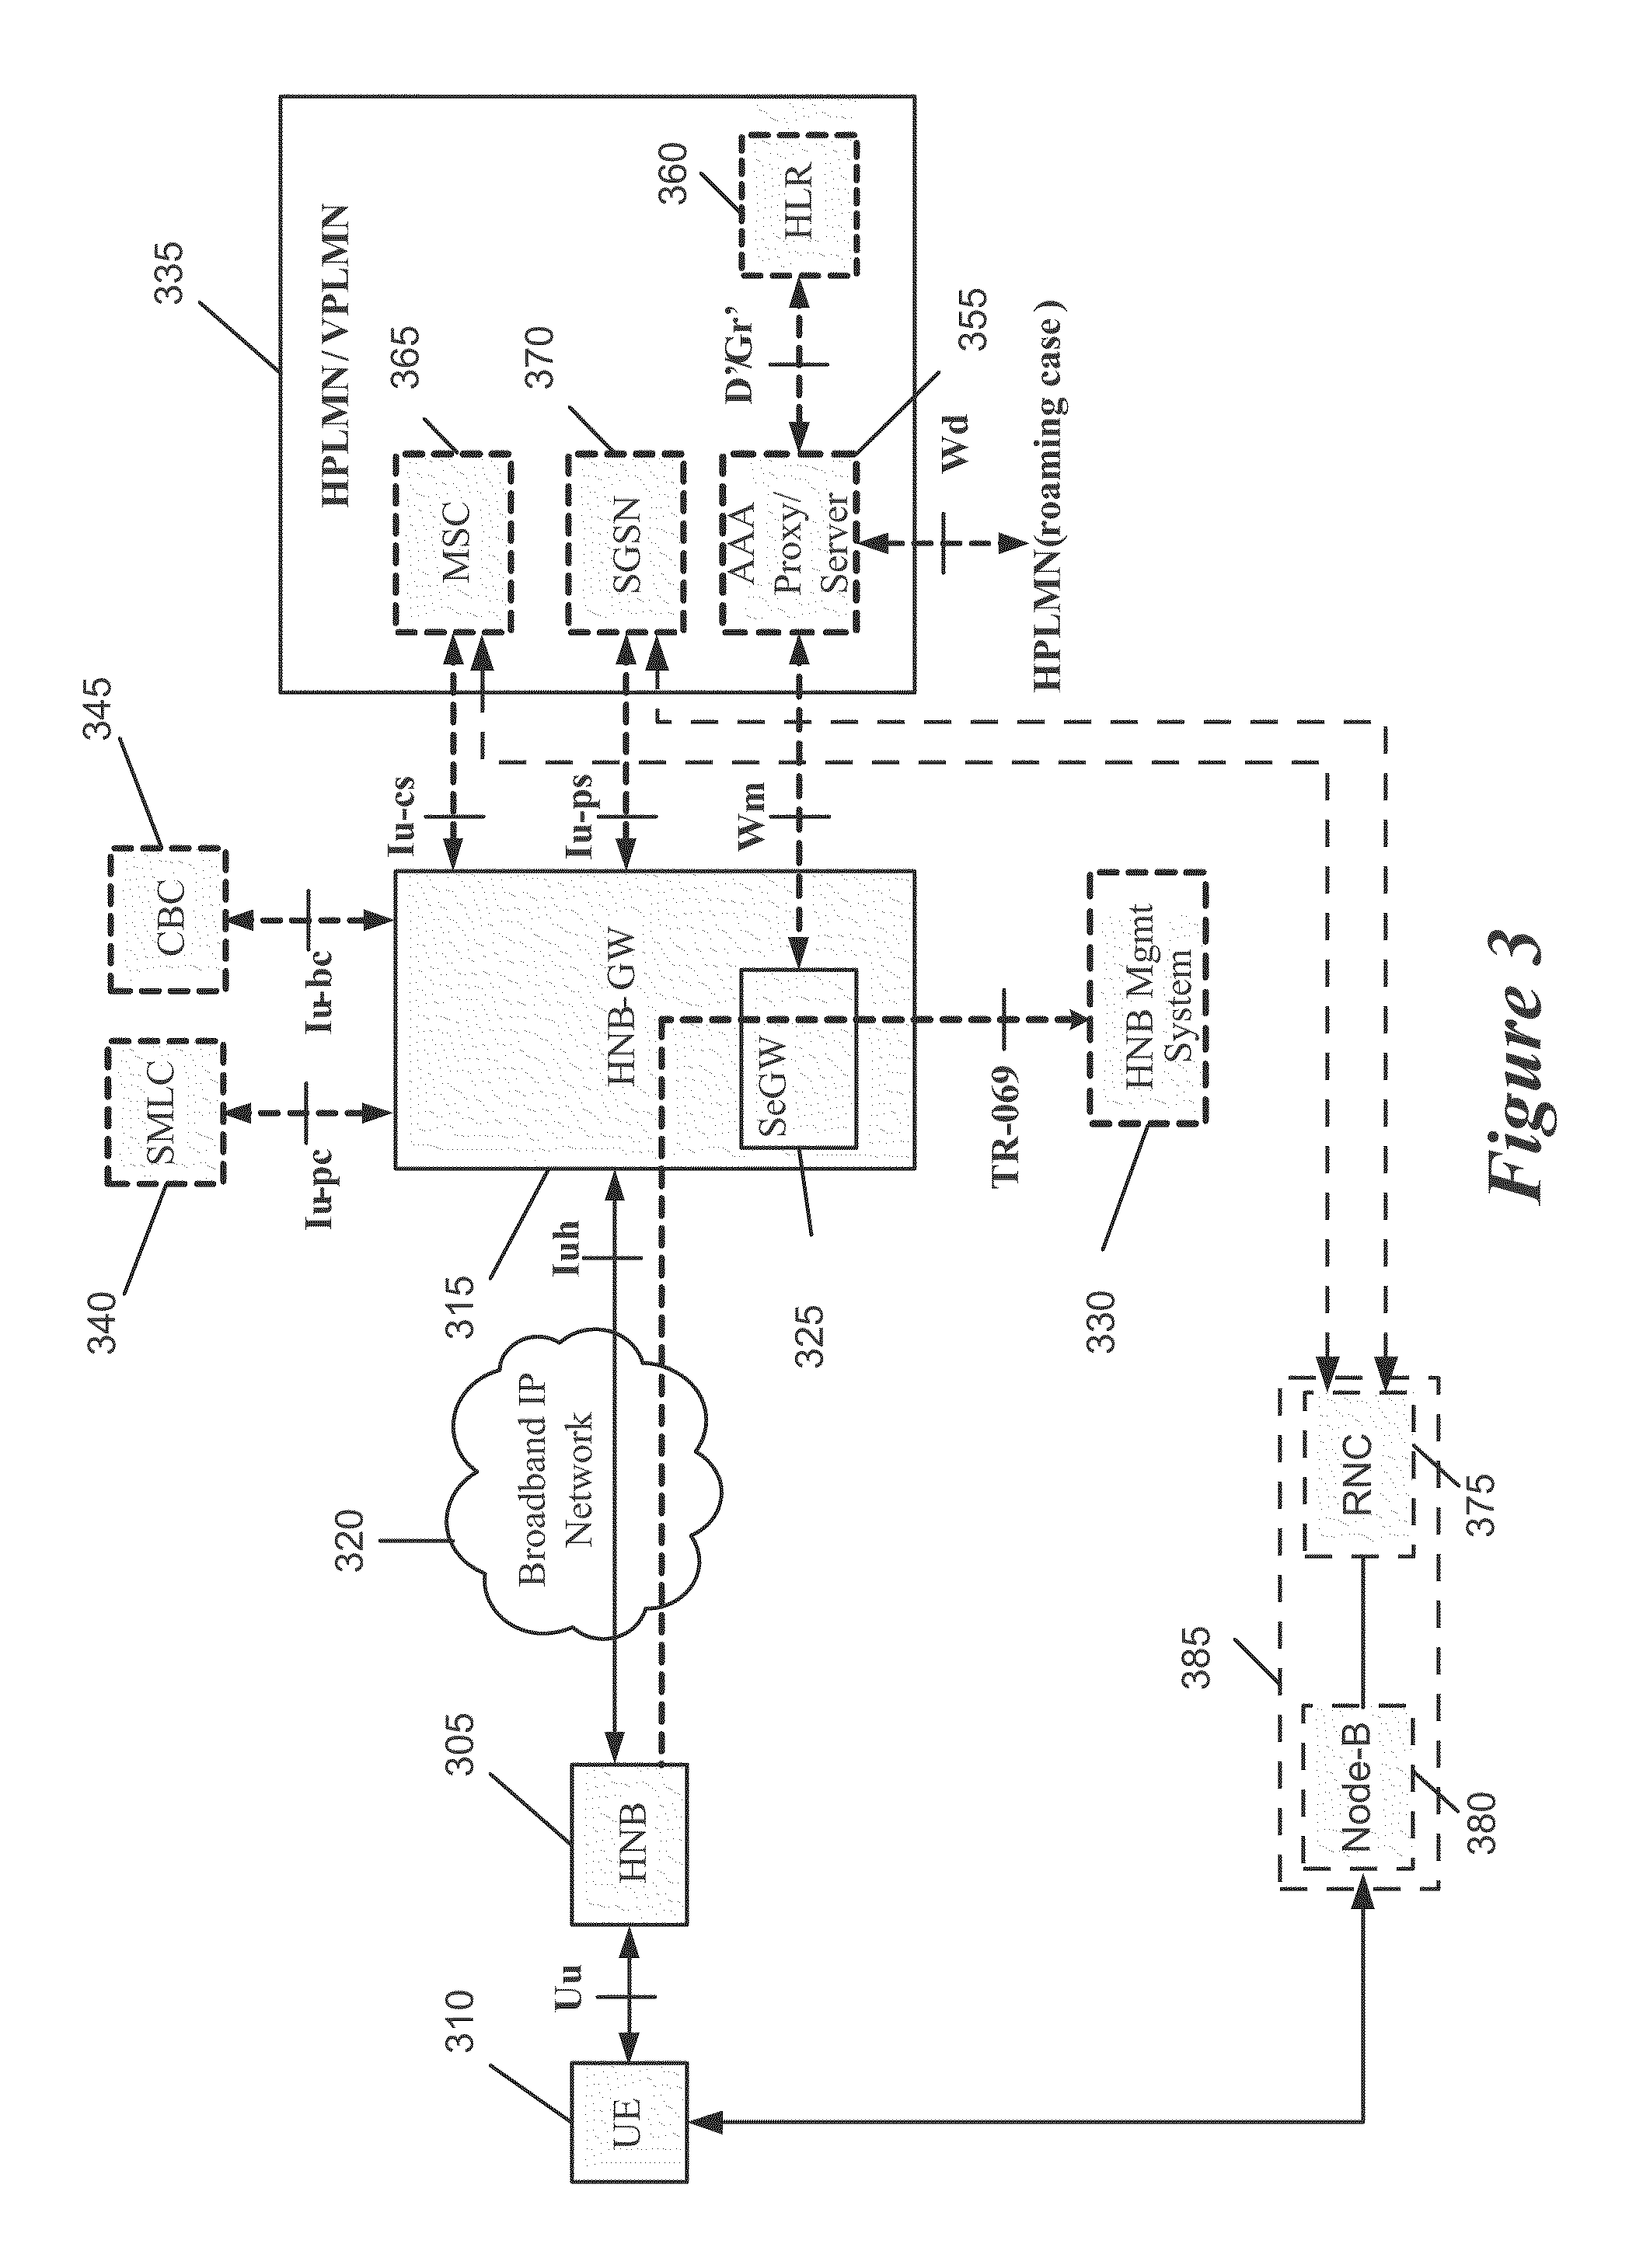 Method and Apparatus for Transport of RANAP Messages over the Iuh Interface in a Home Node B System